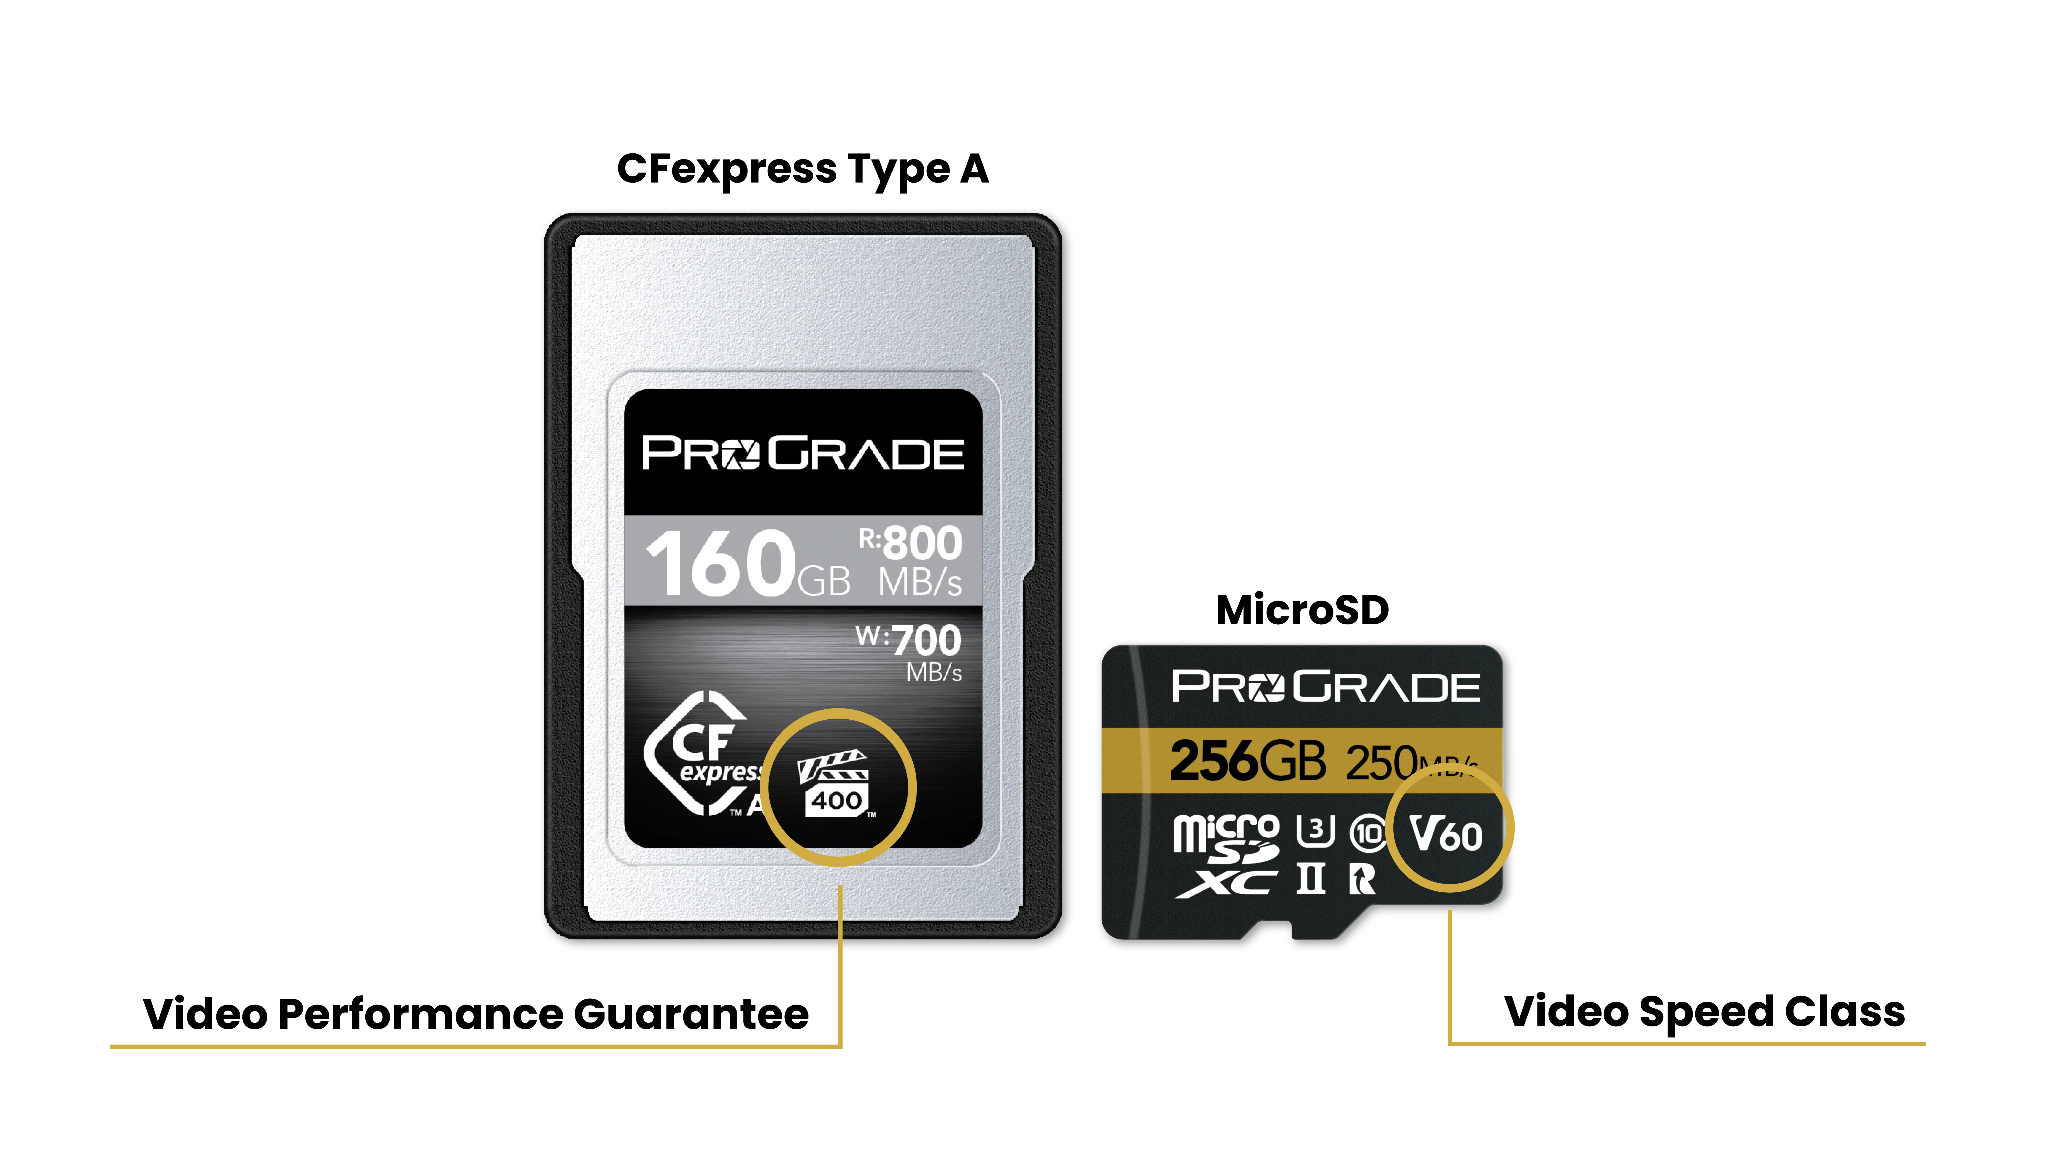 How to Choose a Memory Card for Shooting 4K Video - Kingston Technology